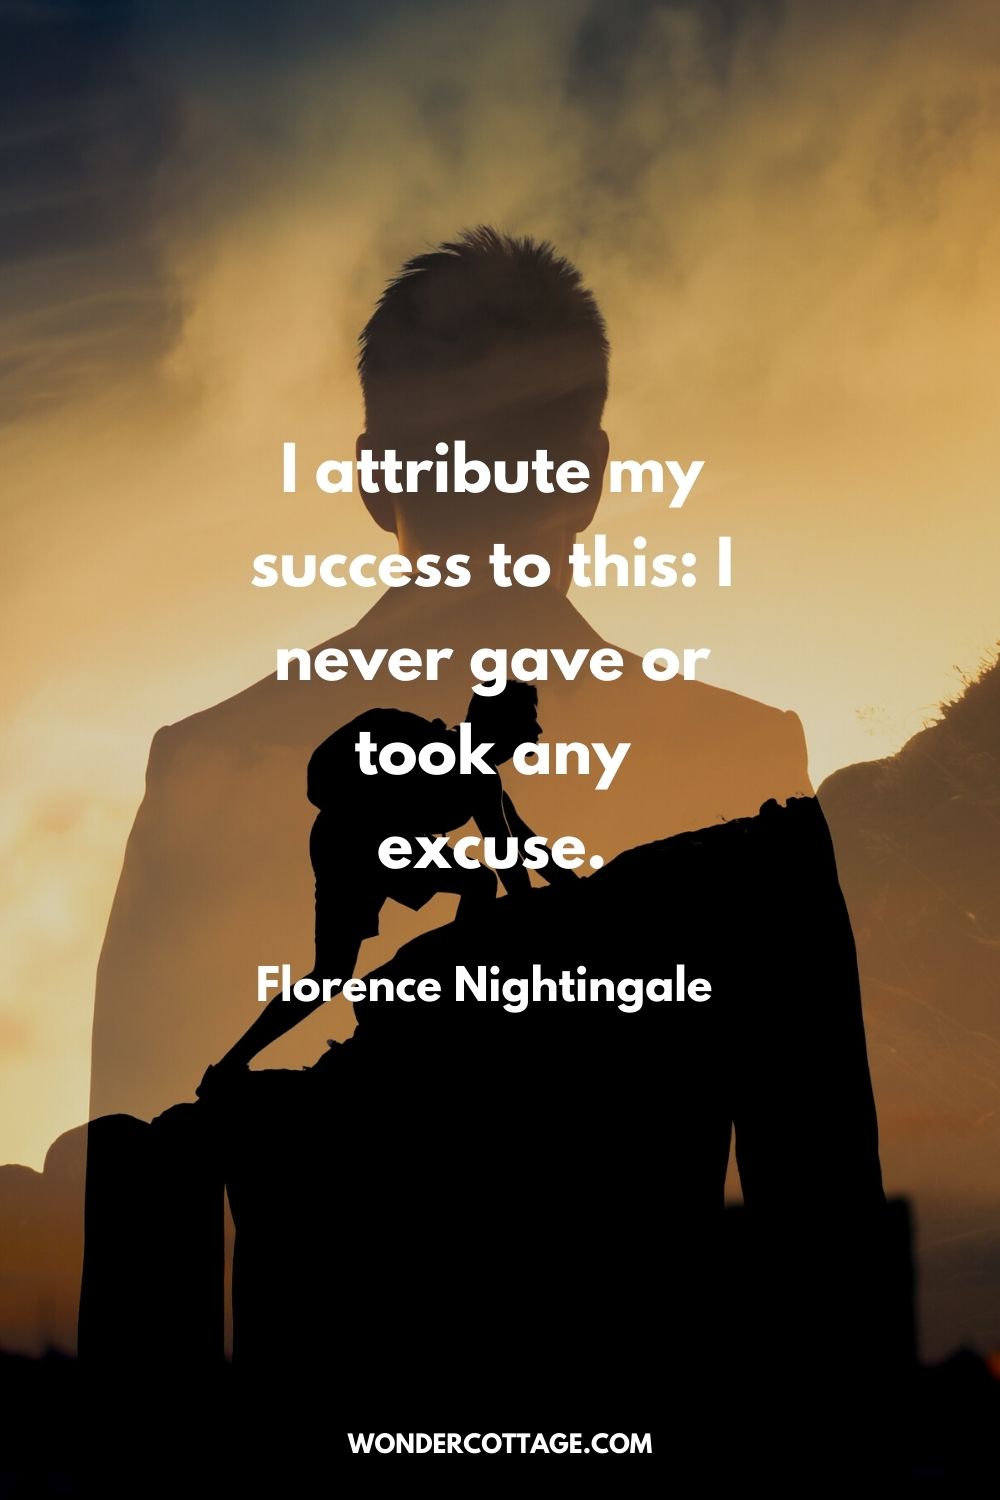 I attribute my success to this: I never gave or took any excuse. Florence Nightingale